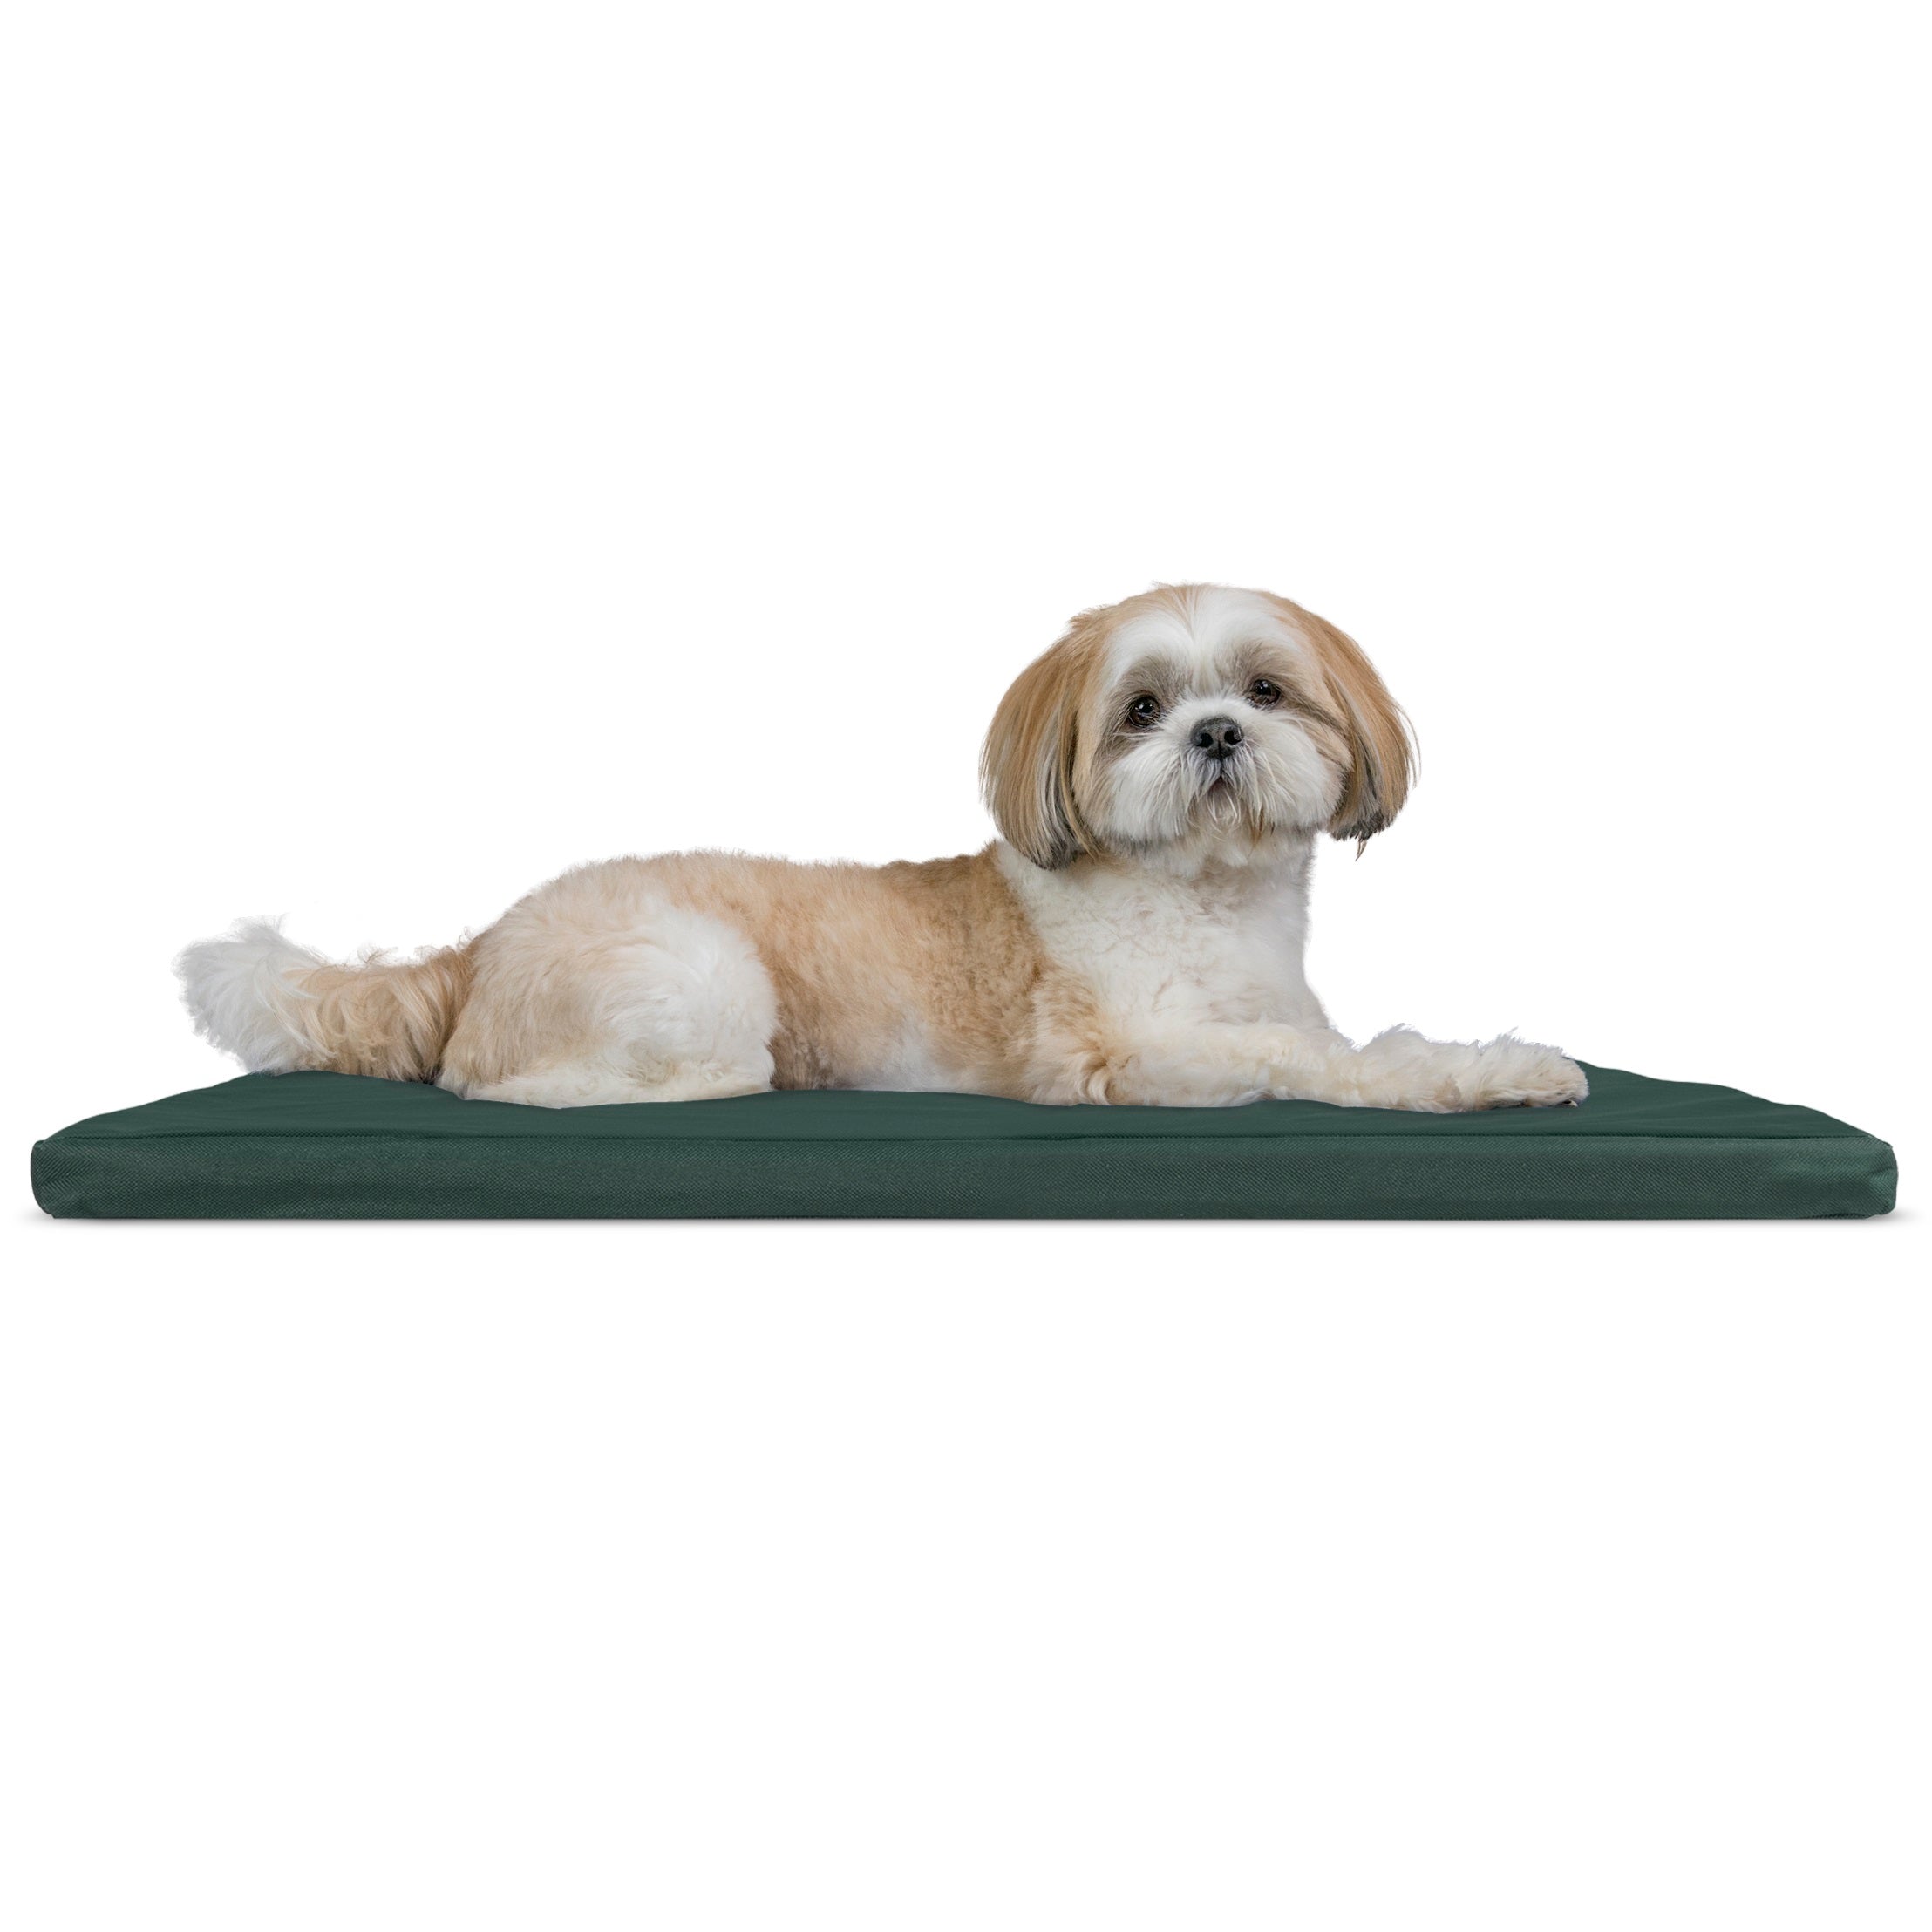 FurHaven Pet Kennel Pad | Reversible Two-Tone Water-Resistant Crate or Kennel Pad Pet Bed for Dogs and Cats， Green/Gray， Medium